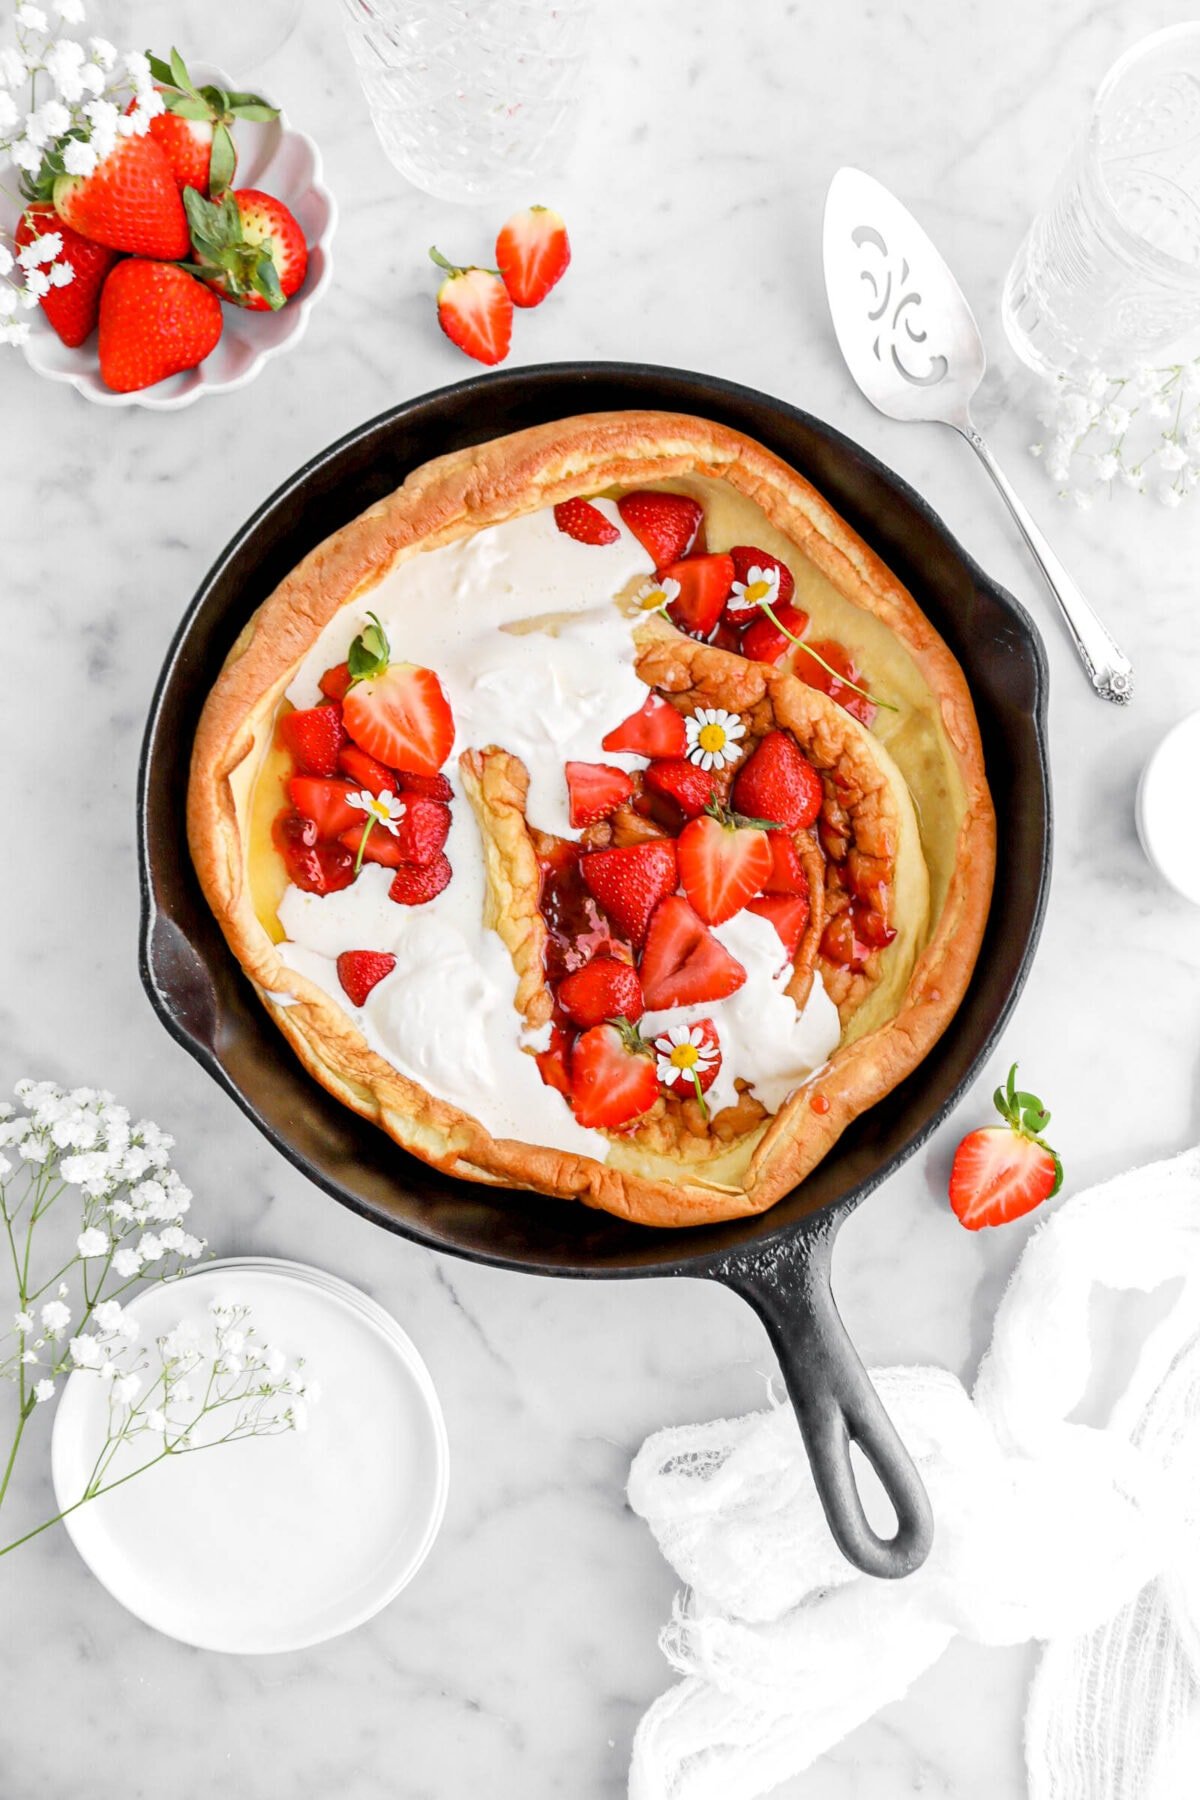 Sautéed strawberries and whipped cream in dutch baby with fresh strawberries and flowers around on marble surface.